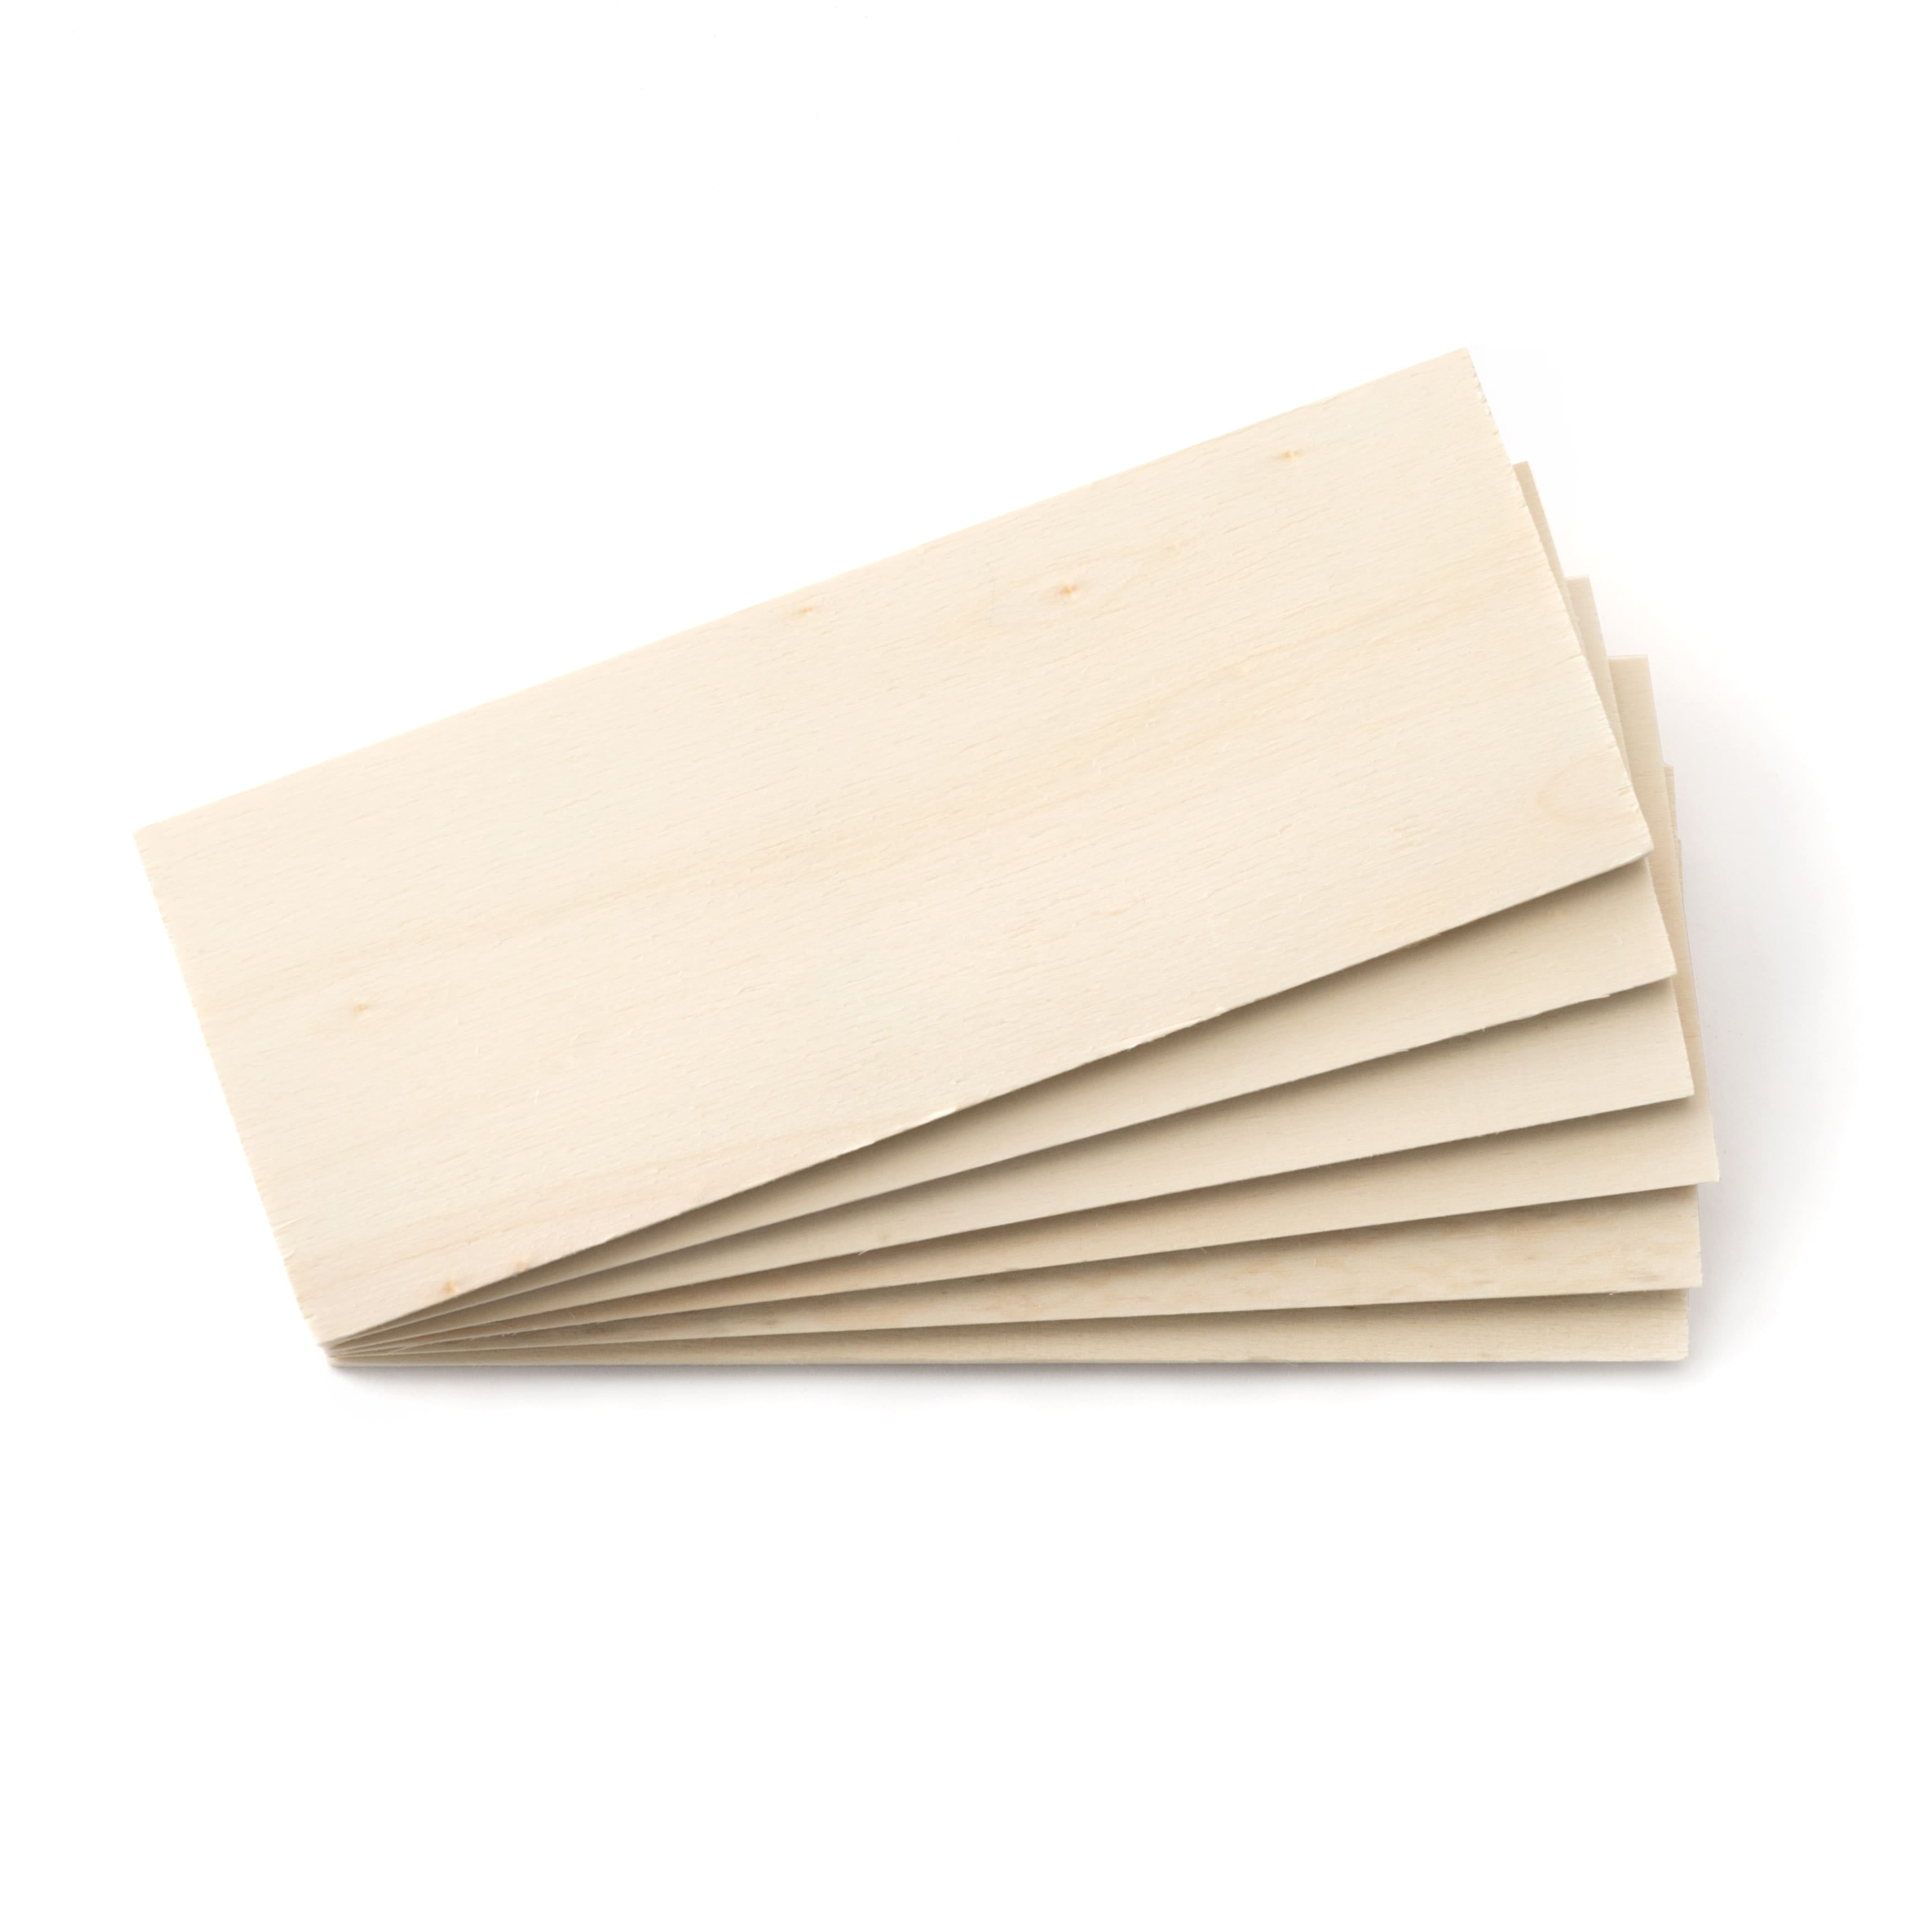 20Pack Basswood Sheets 1/16 Plywood Sheets 11.8 x 11.8 Inch Craft Wood Bass  Wood for Cricut Maker, Architecture Model Materials, Pyrography, Wood